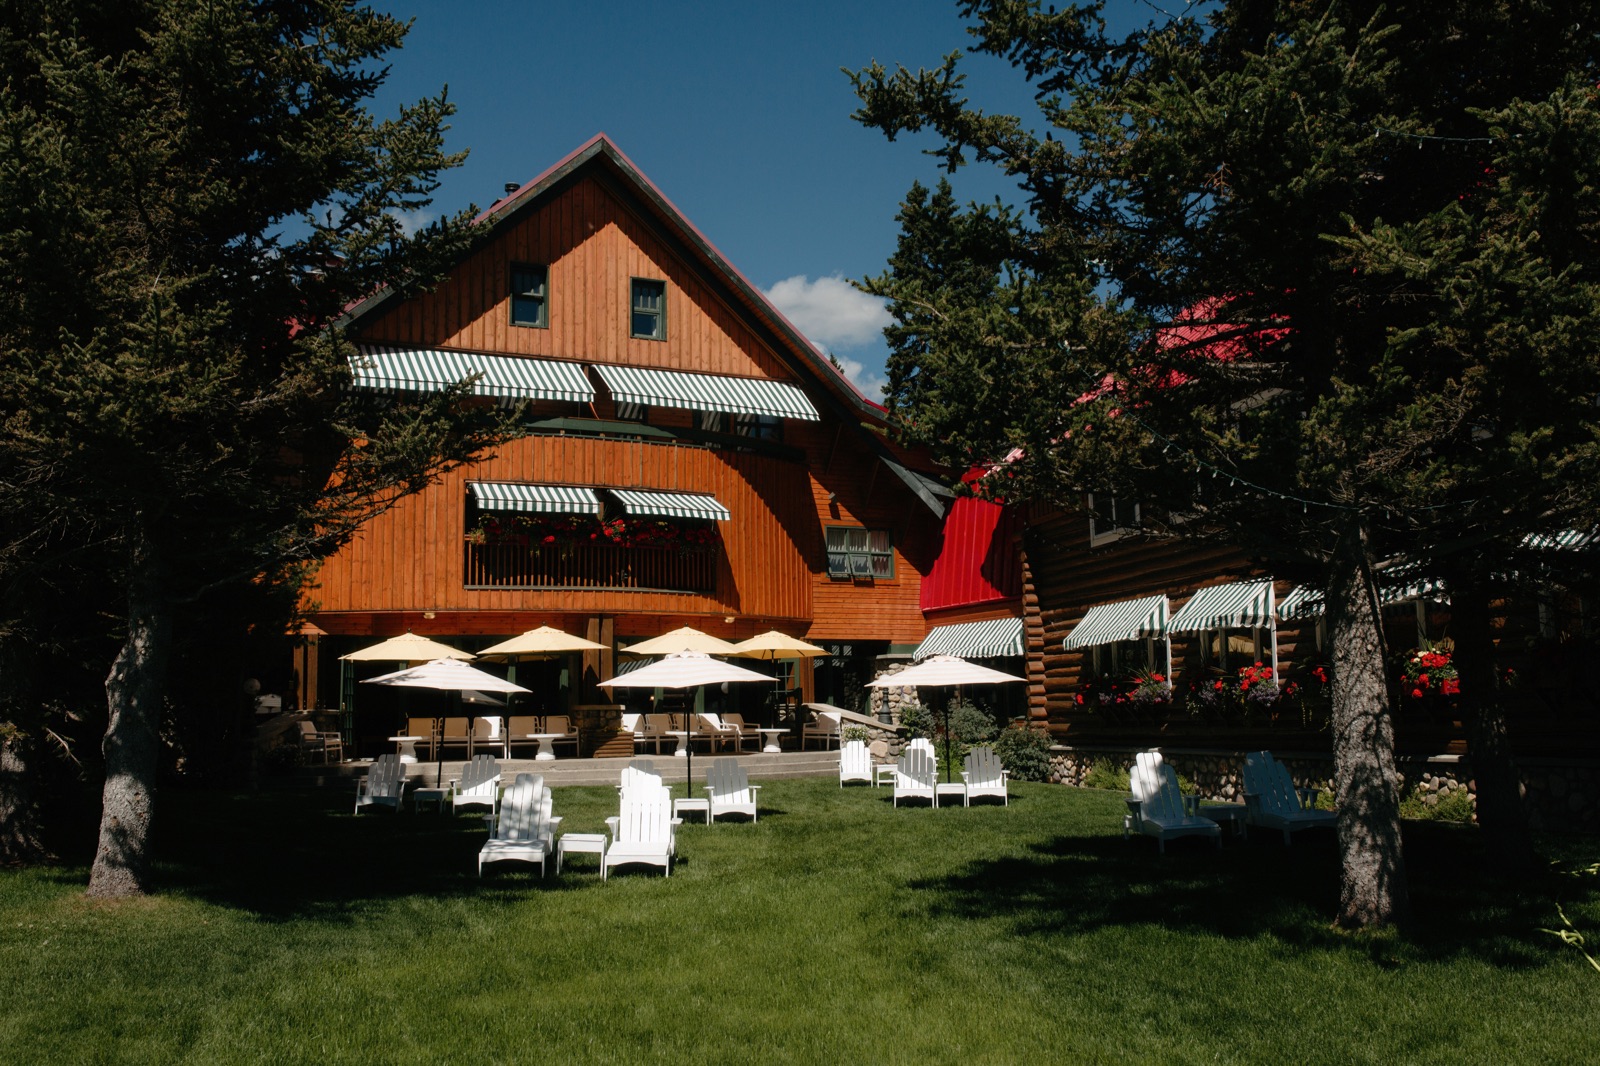 The lounge and sun space at the historic Post Hotel in Lake Louise with green and white striped awnings